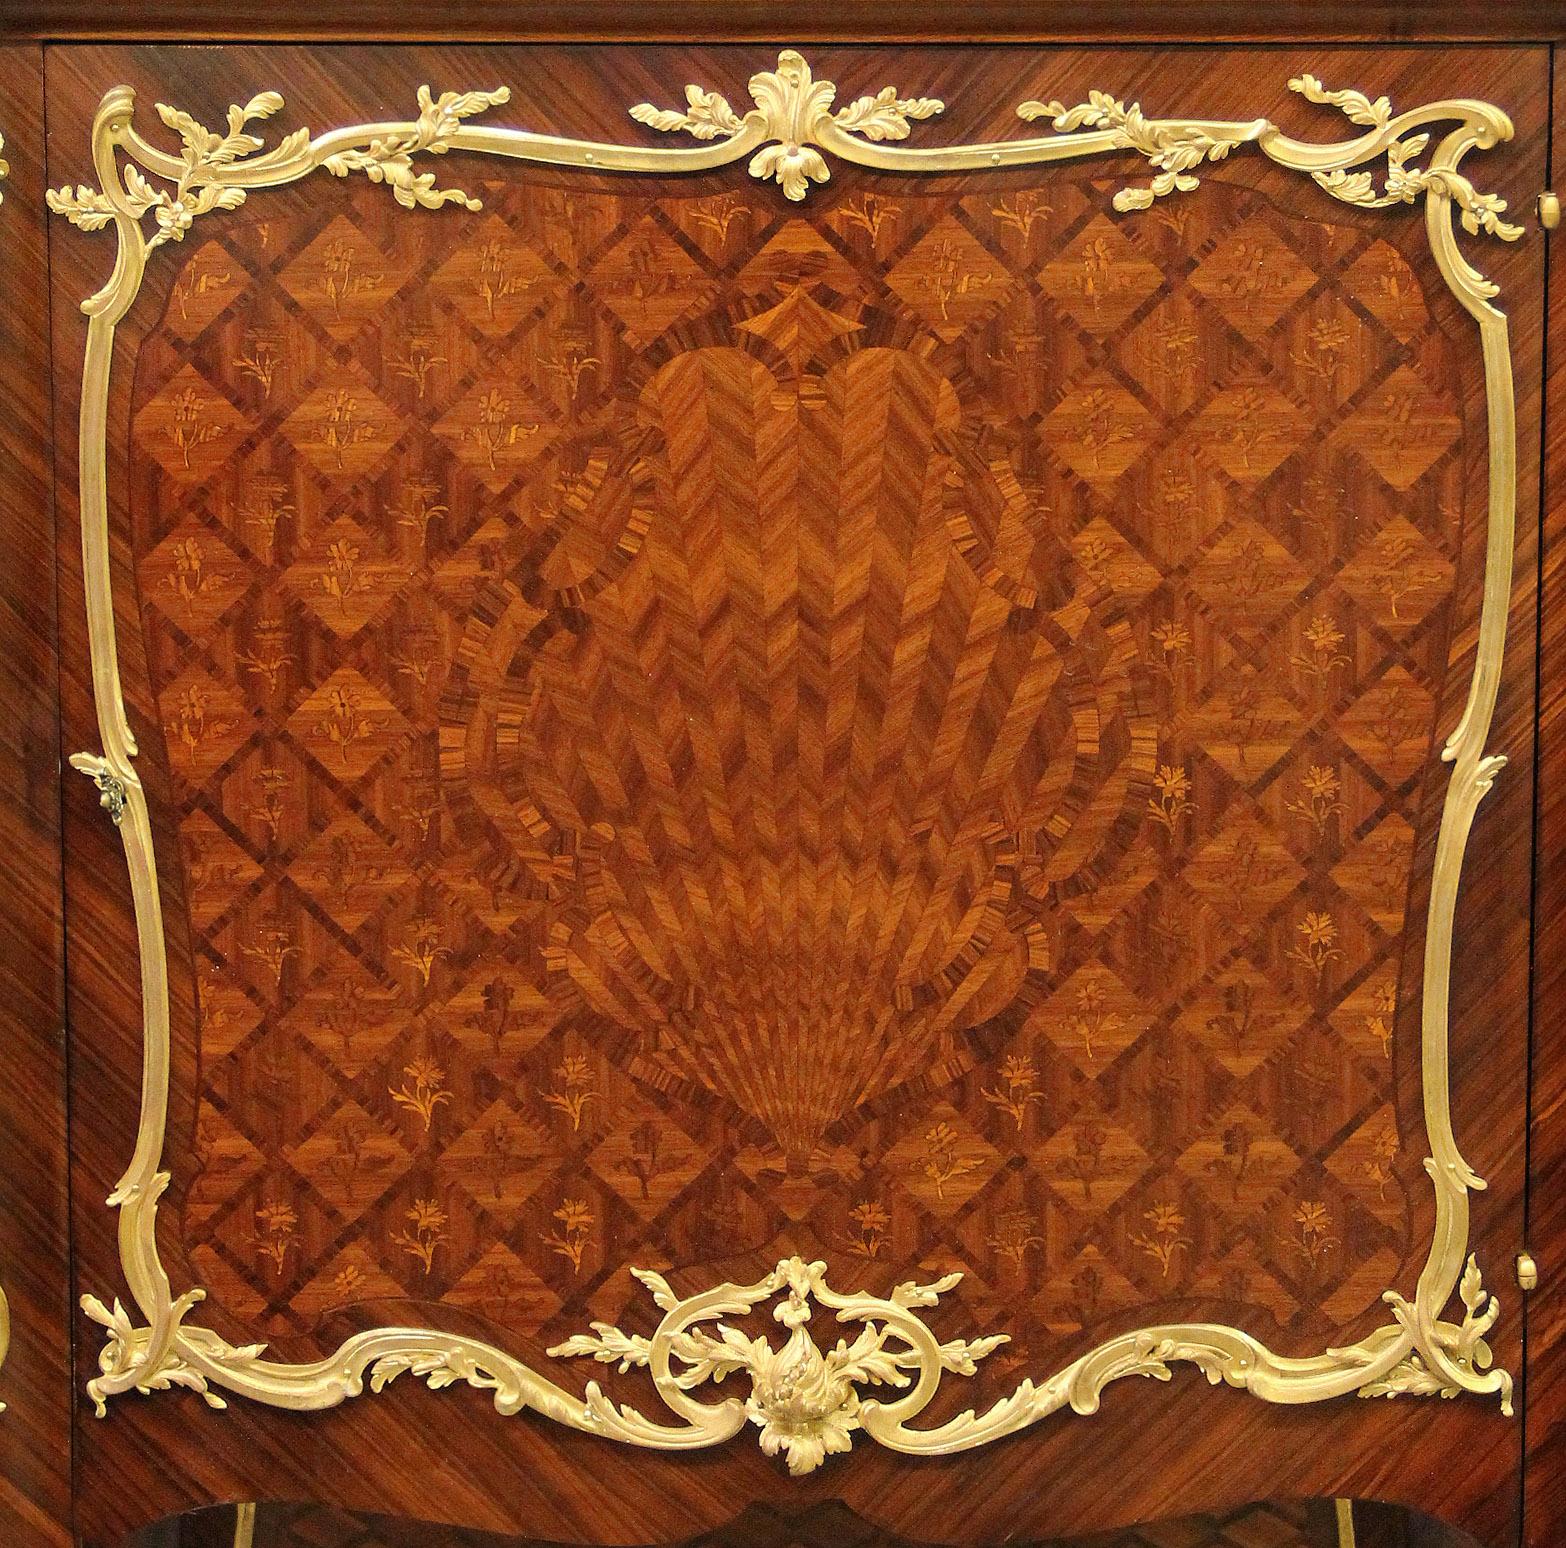 A lovely late 19th century Louis XV style gilt bronze mounted inlaid marquetry and parquetry cabinet by François Linke

François Linke – Index no. 832

The rectangular brèche violette marble top above a spreading frieze and conforming case, the